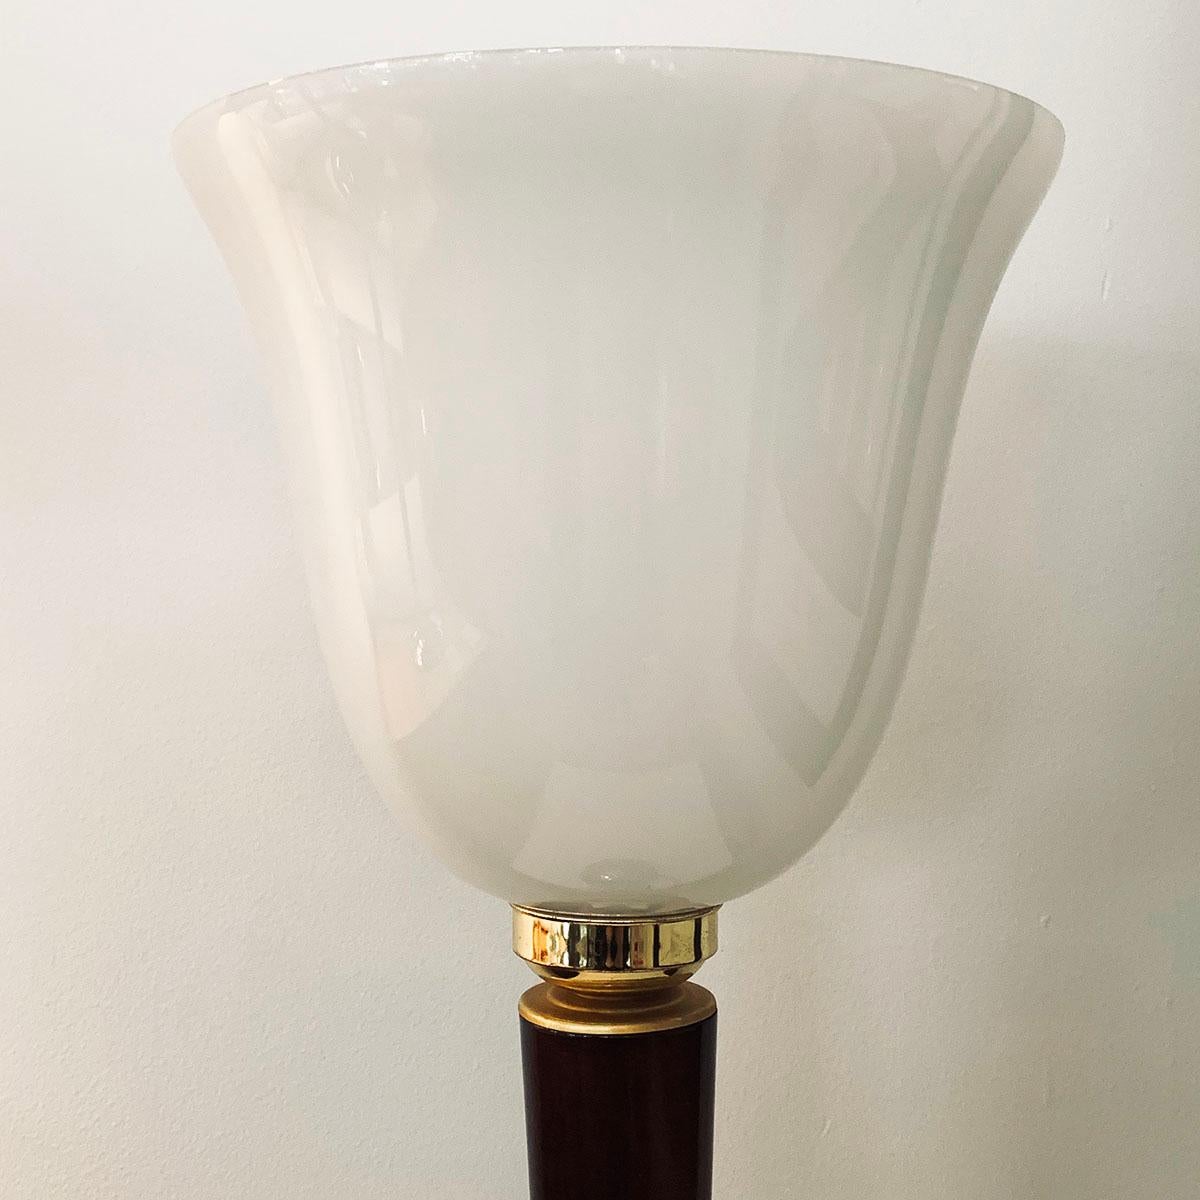 Art Deco Mazda lamp with original opalescent glass shade and switch. This lamp is in amazing condition, an excellent example of polished mahogany base with rounded top edge and slim, tapering column, finishing in the gilt/brass top; just a slight